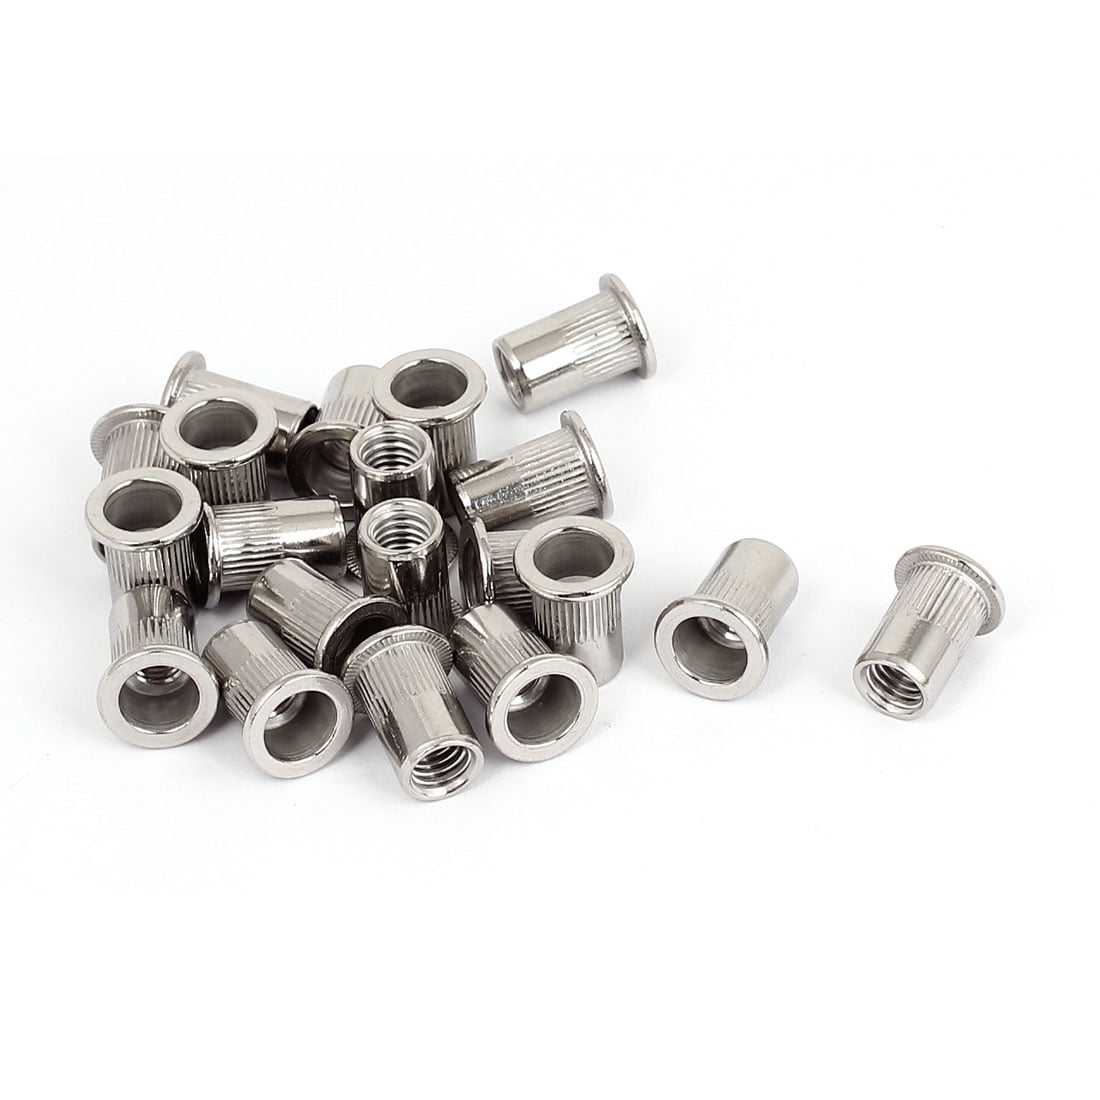 Details about   Mixed Rivet Nut Kit DIY Insert Nut Stainless Steel Professional For Fastener 